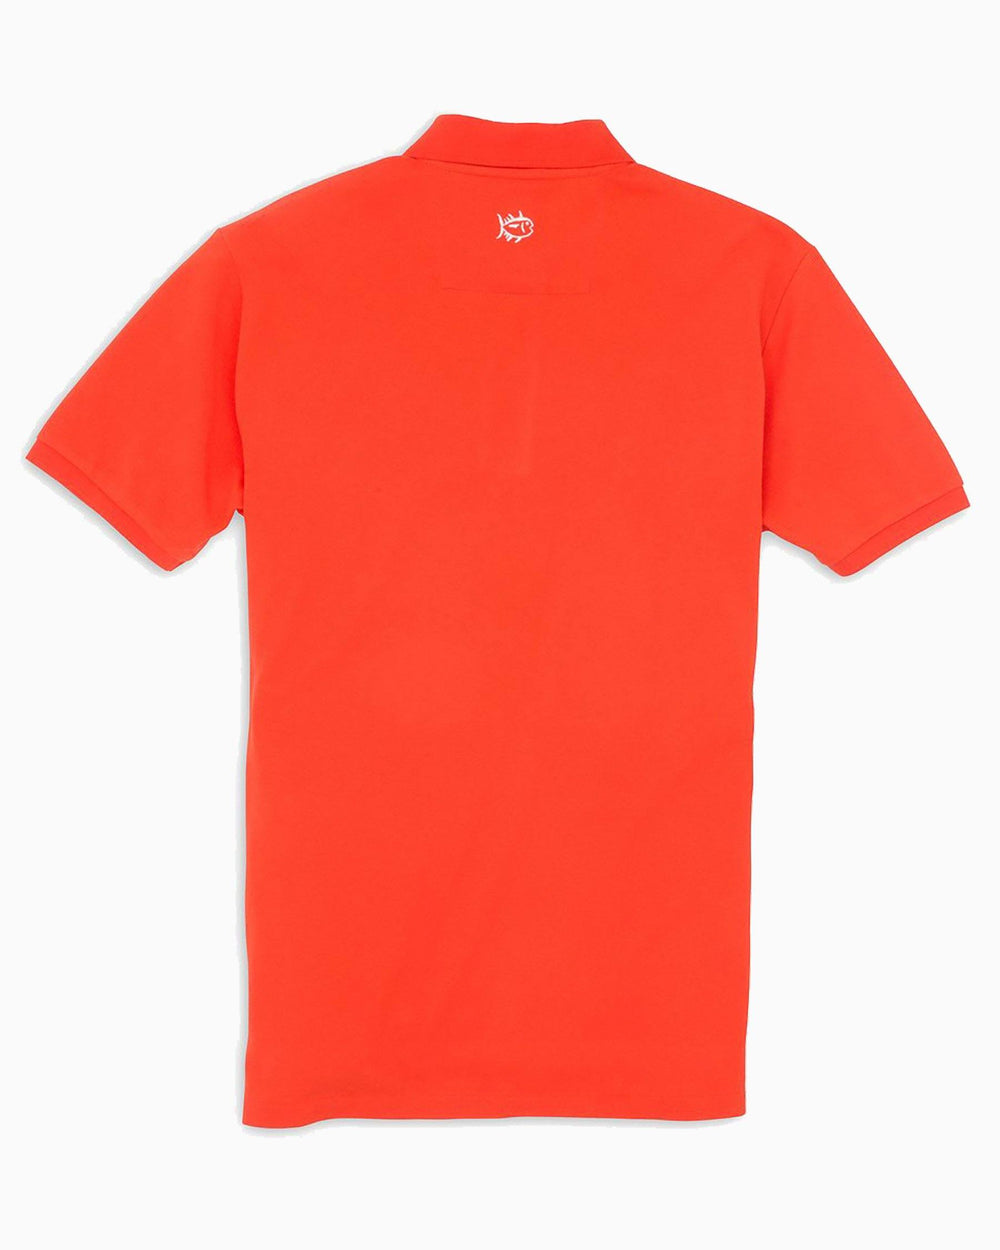 The back view of the Men's Orange Clemson Tigers Pique Polo Shirt by Southern Tide - Endzone Orange